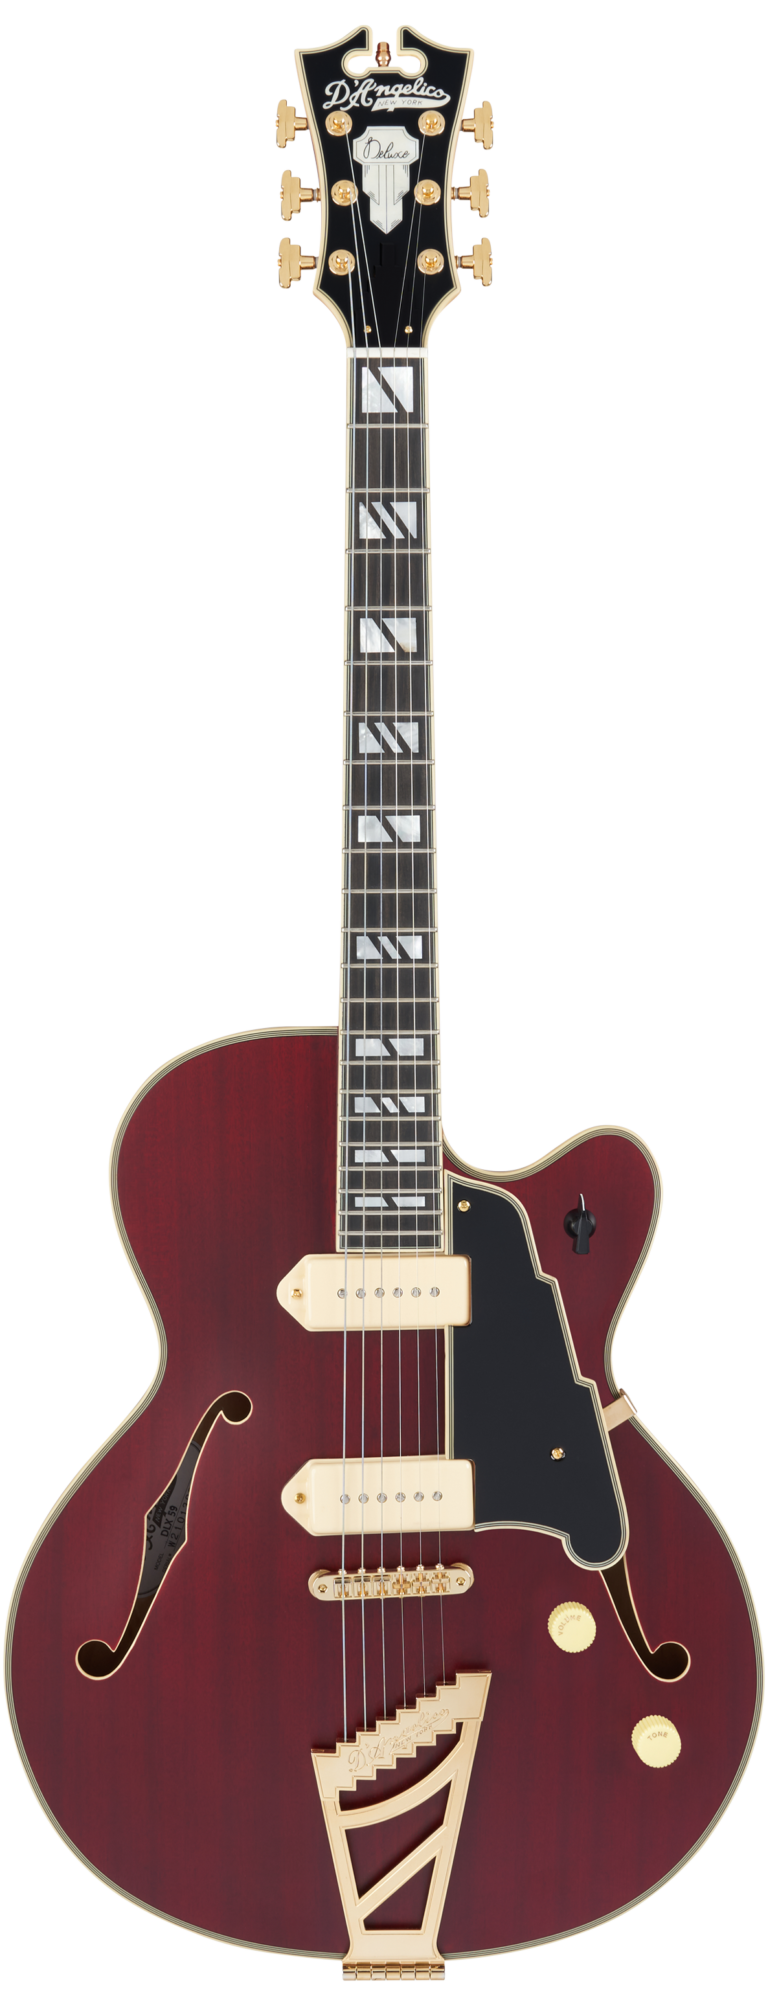 D'Angelico DELUXE 59 Series Hollow Body Electric Guitar (Satin Trans Wine)